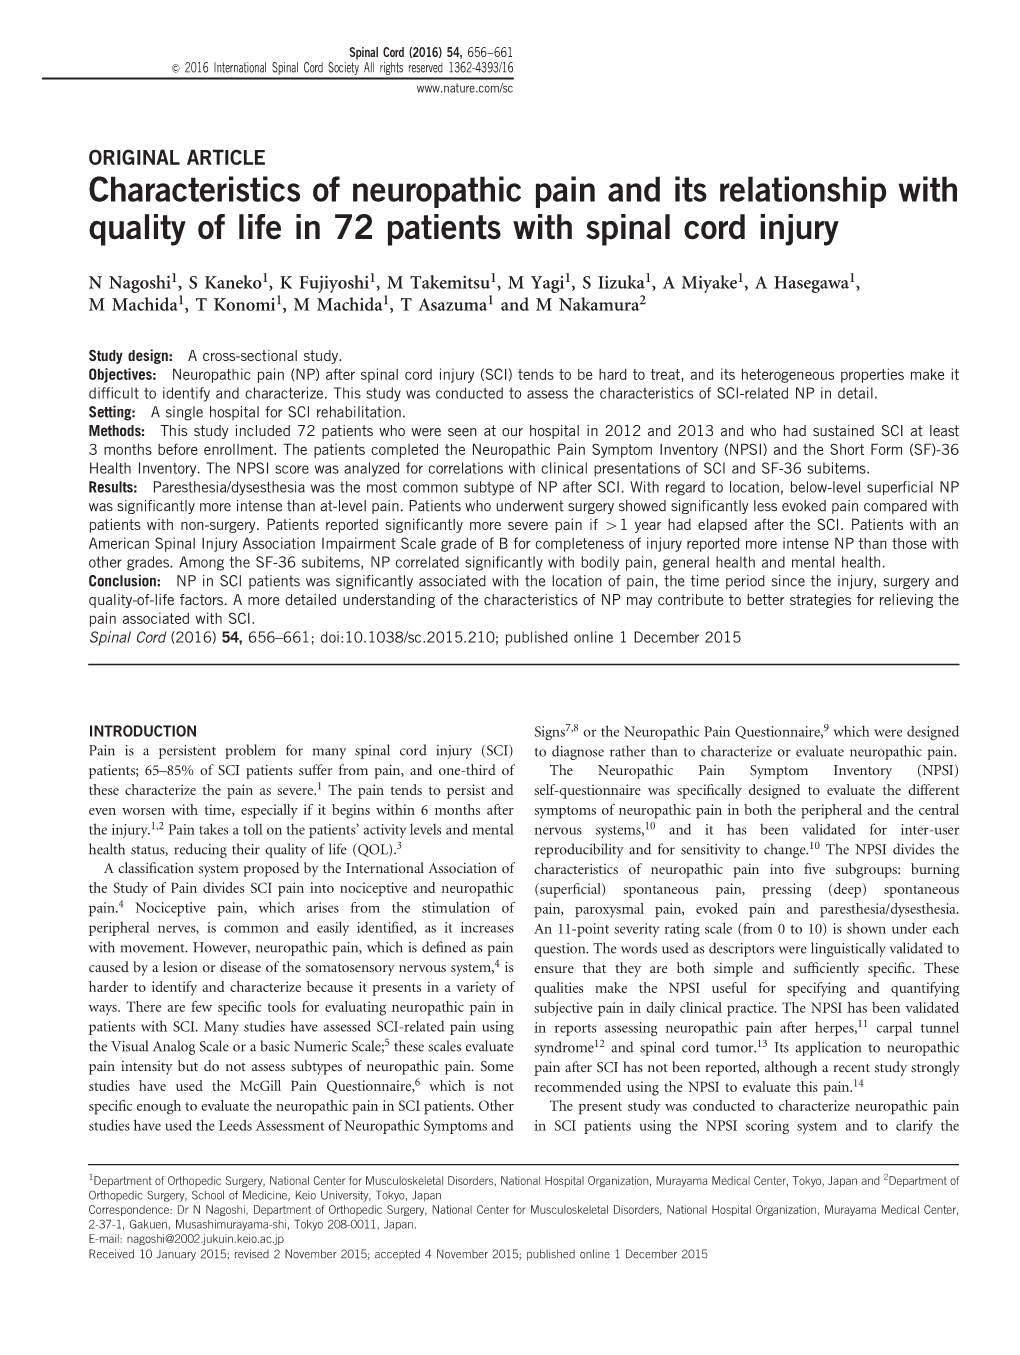 Characteristics of Neuropathic Pain and Its Relationship with Quality of Life in 72 Patients with Spinal Cord Injury